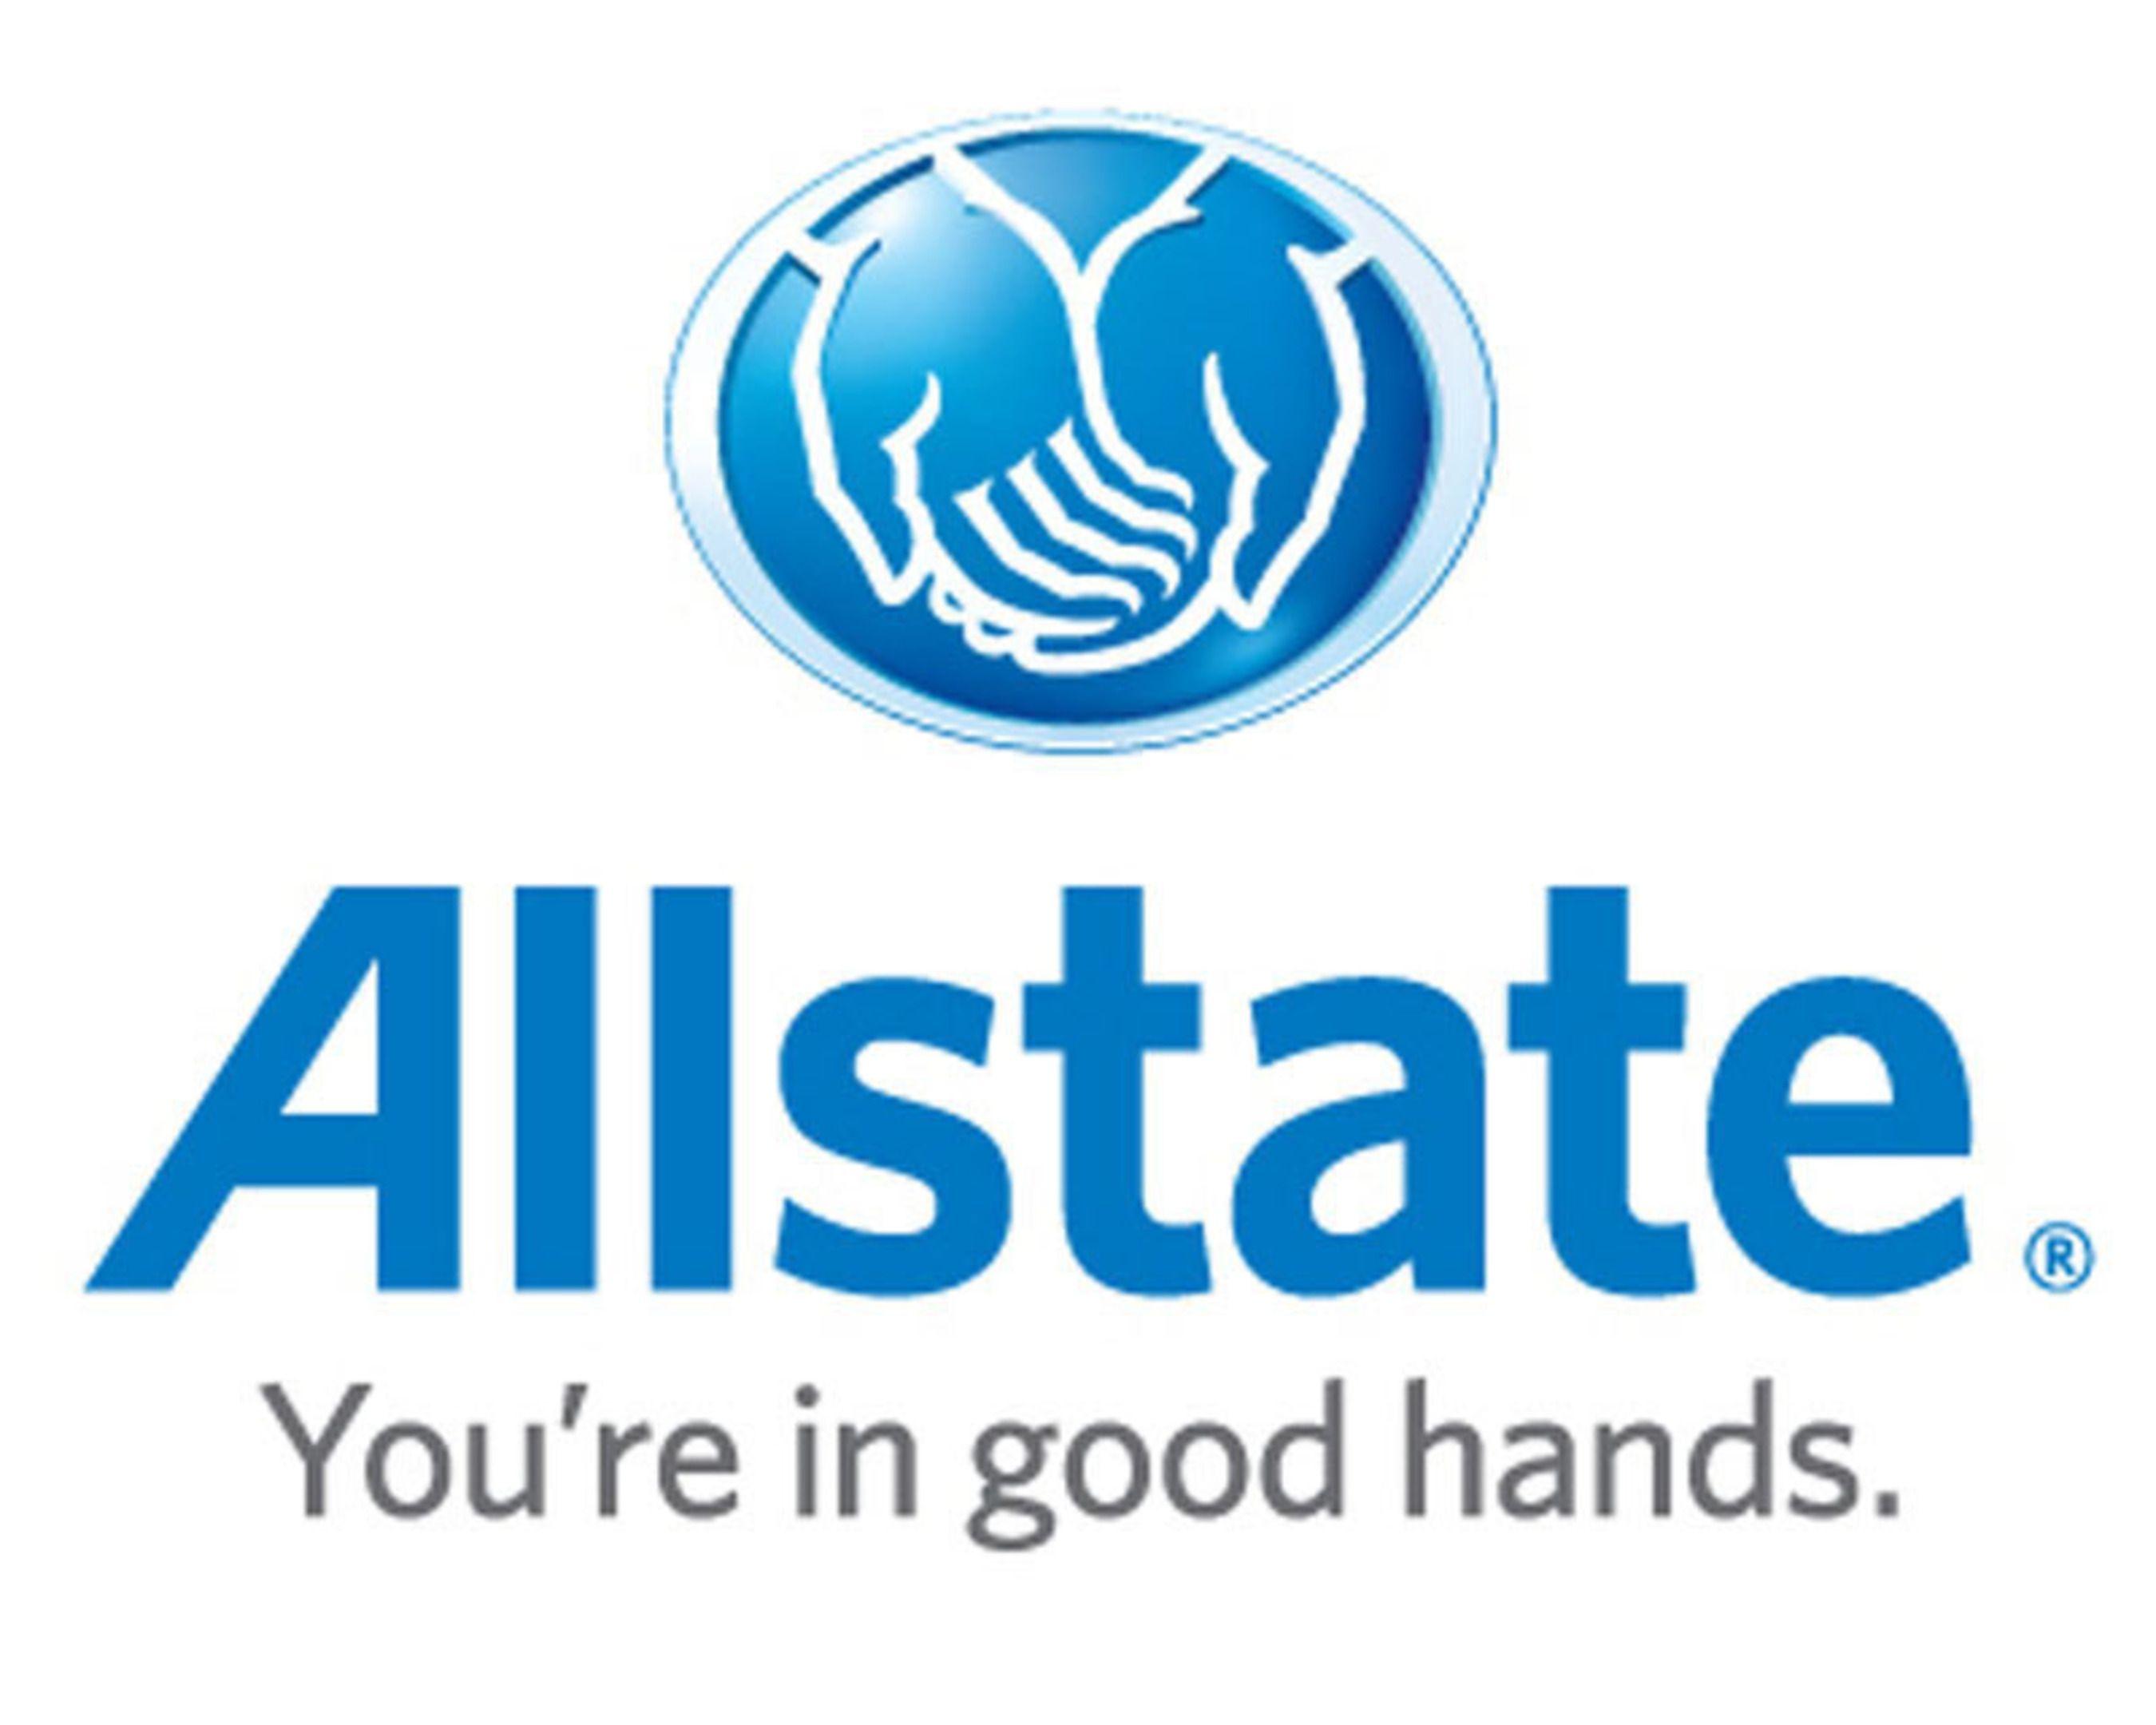 Allstate Logo - Allstate Teams up with Country Music Star Frankie Ballard to ...